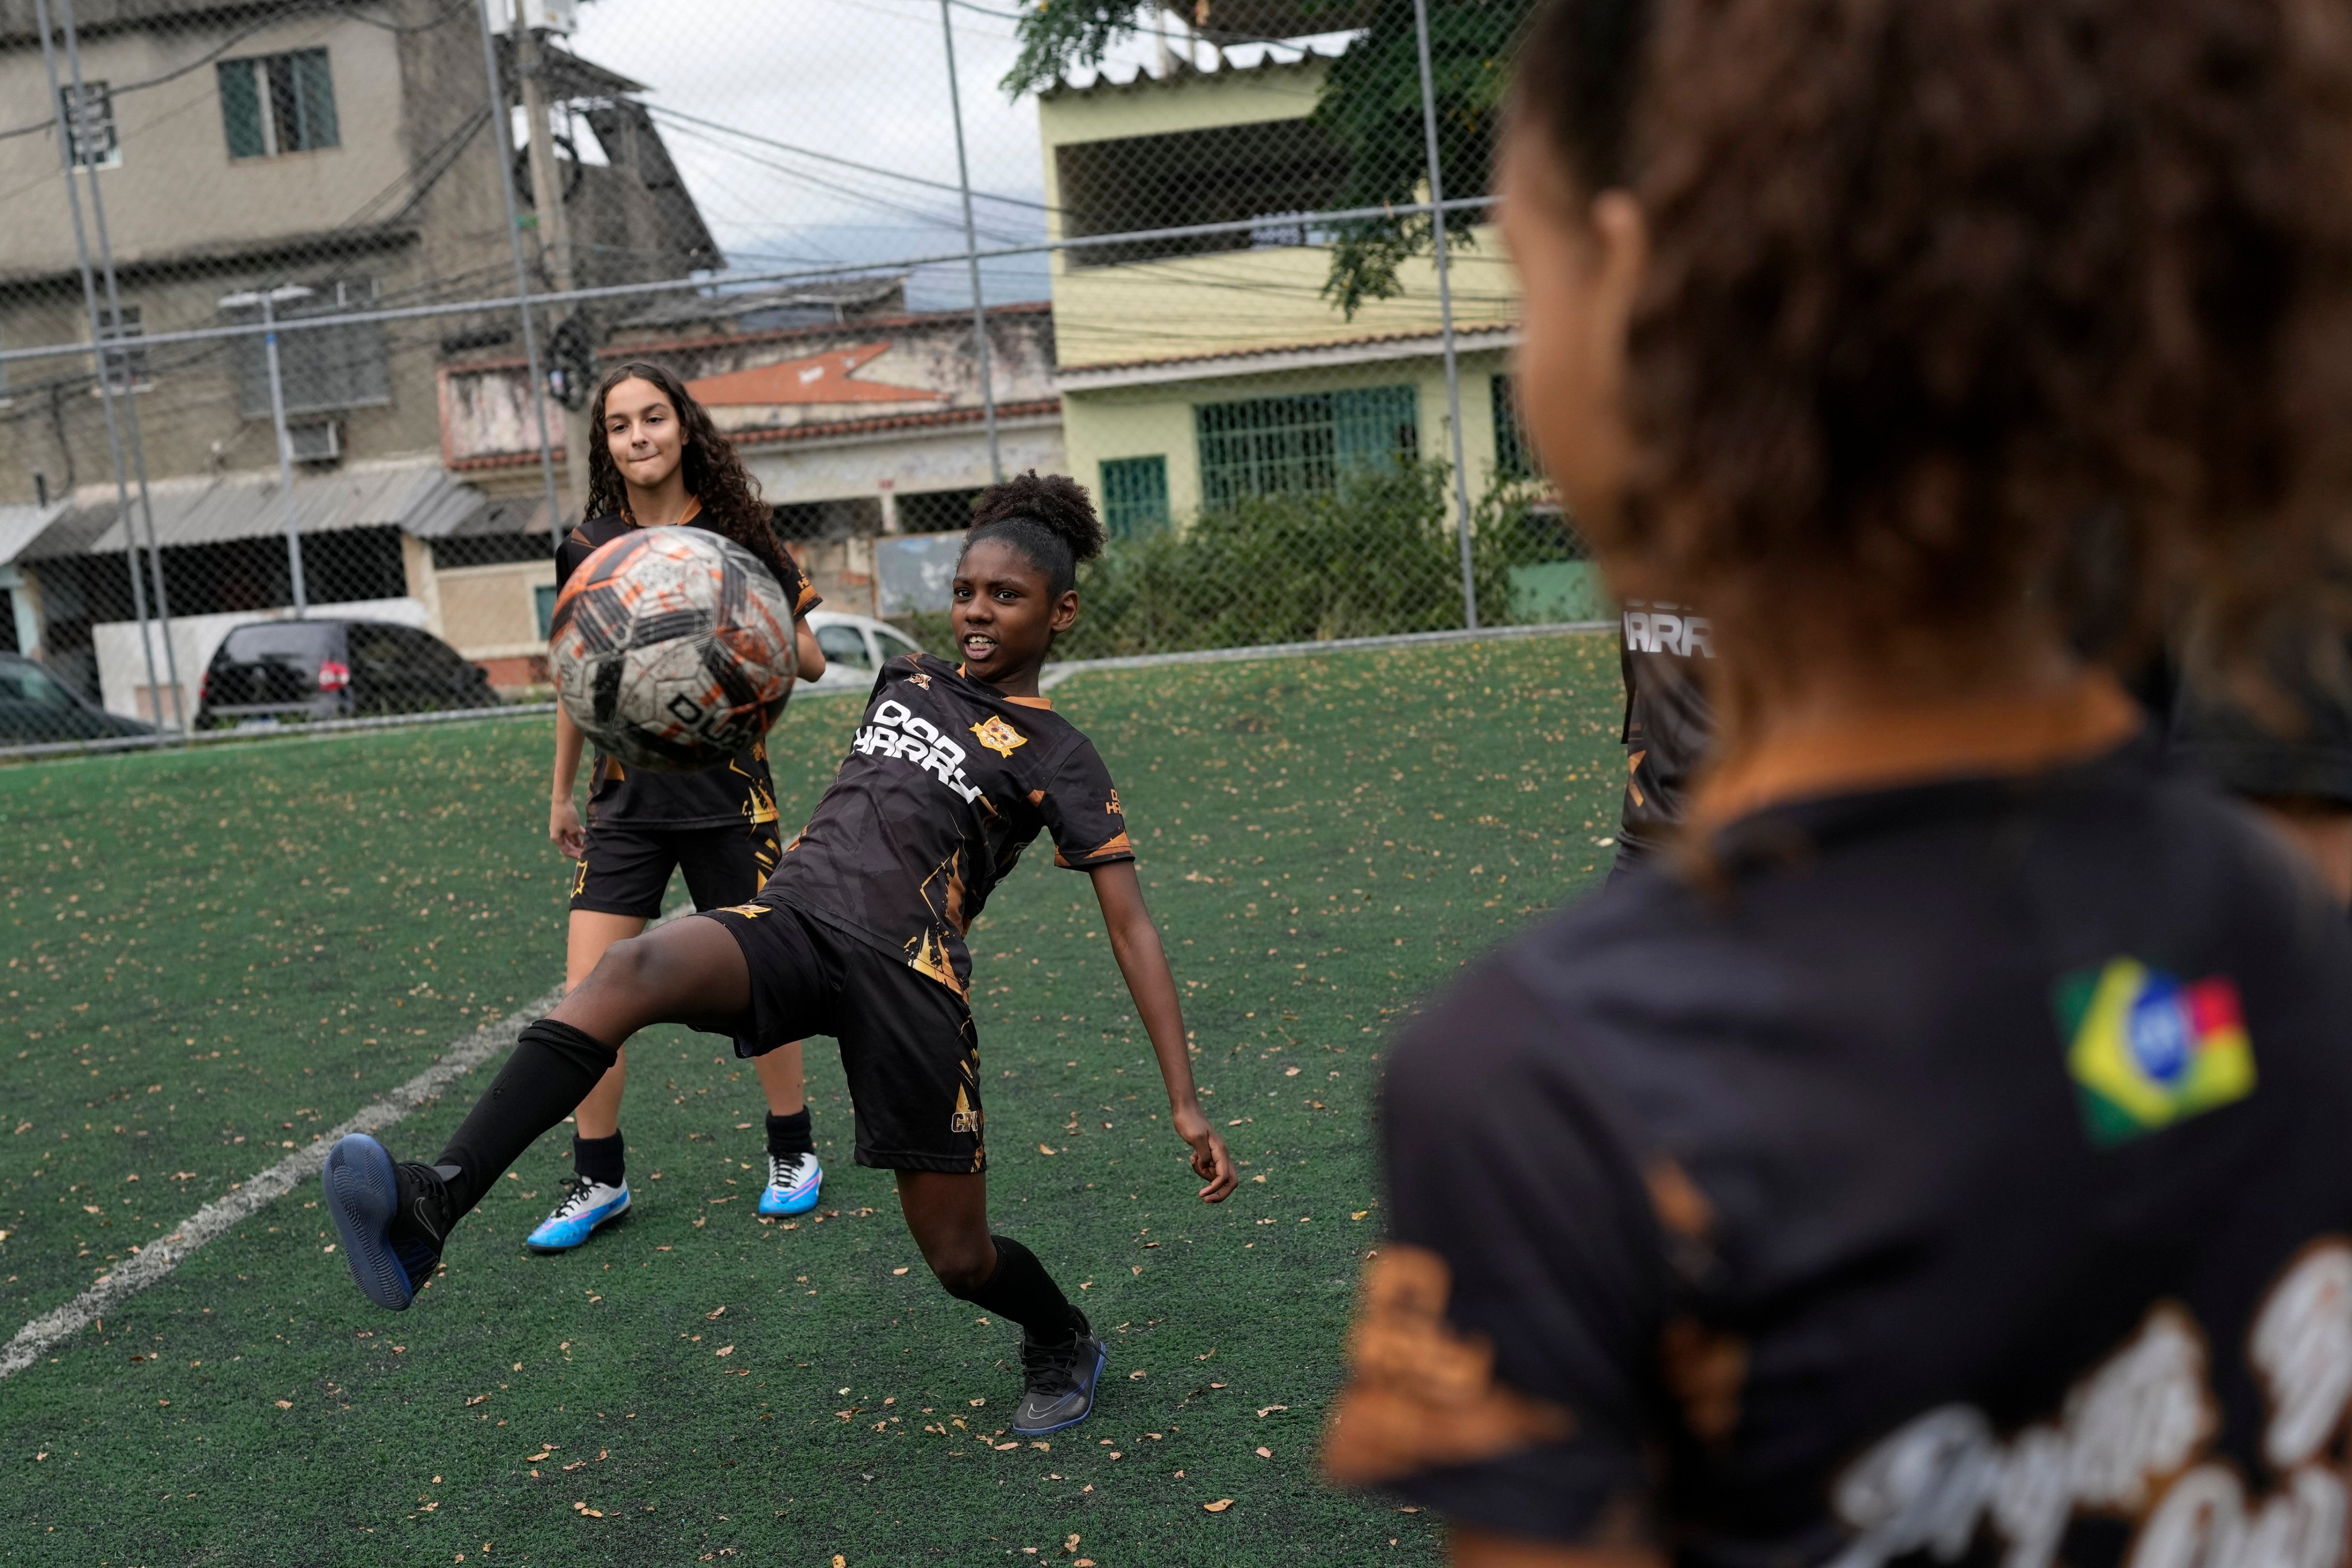 Young women take part in football training at the Complexo da Alemao favela in Rio de Janeiro. A five-time champion in men’s soccer, more than any other country, Brazil has yet to win its first Women’s World Cup trophy. Photo: AP